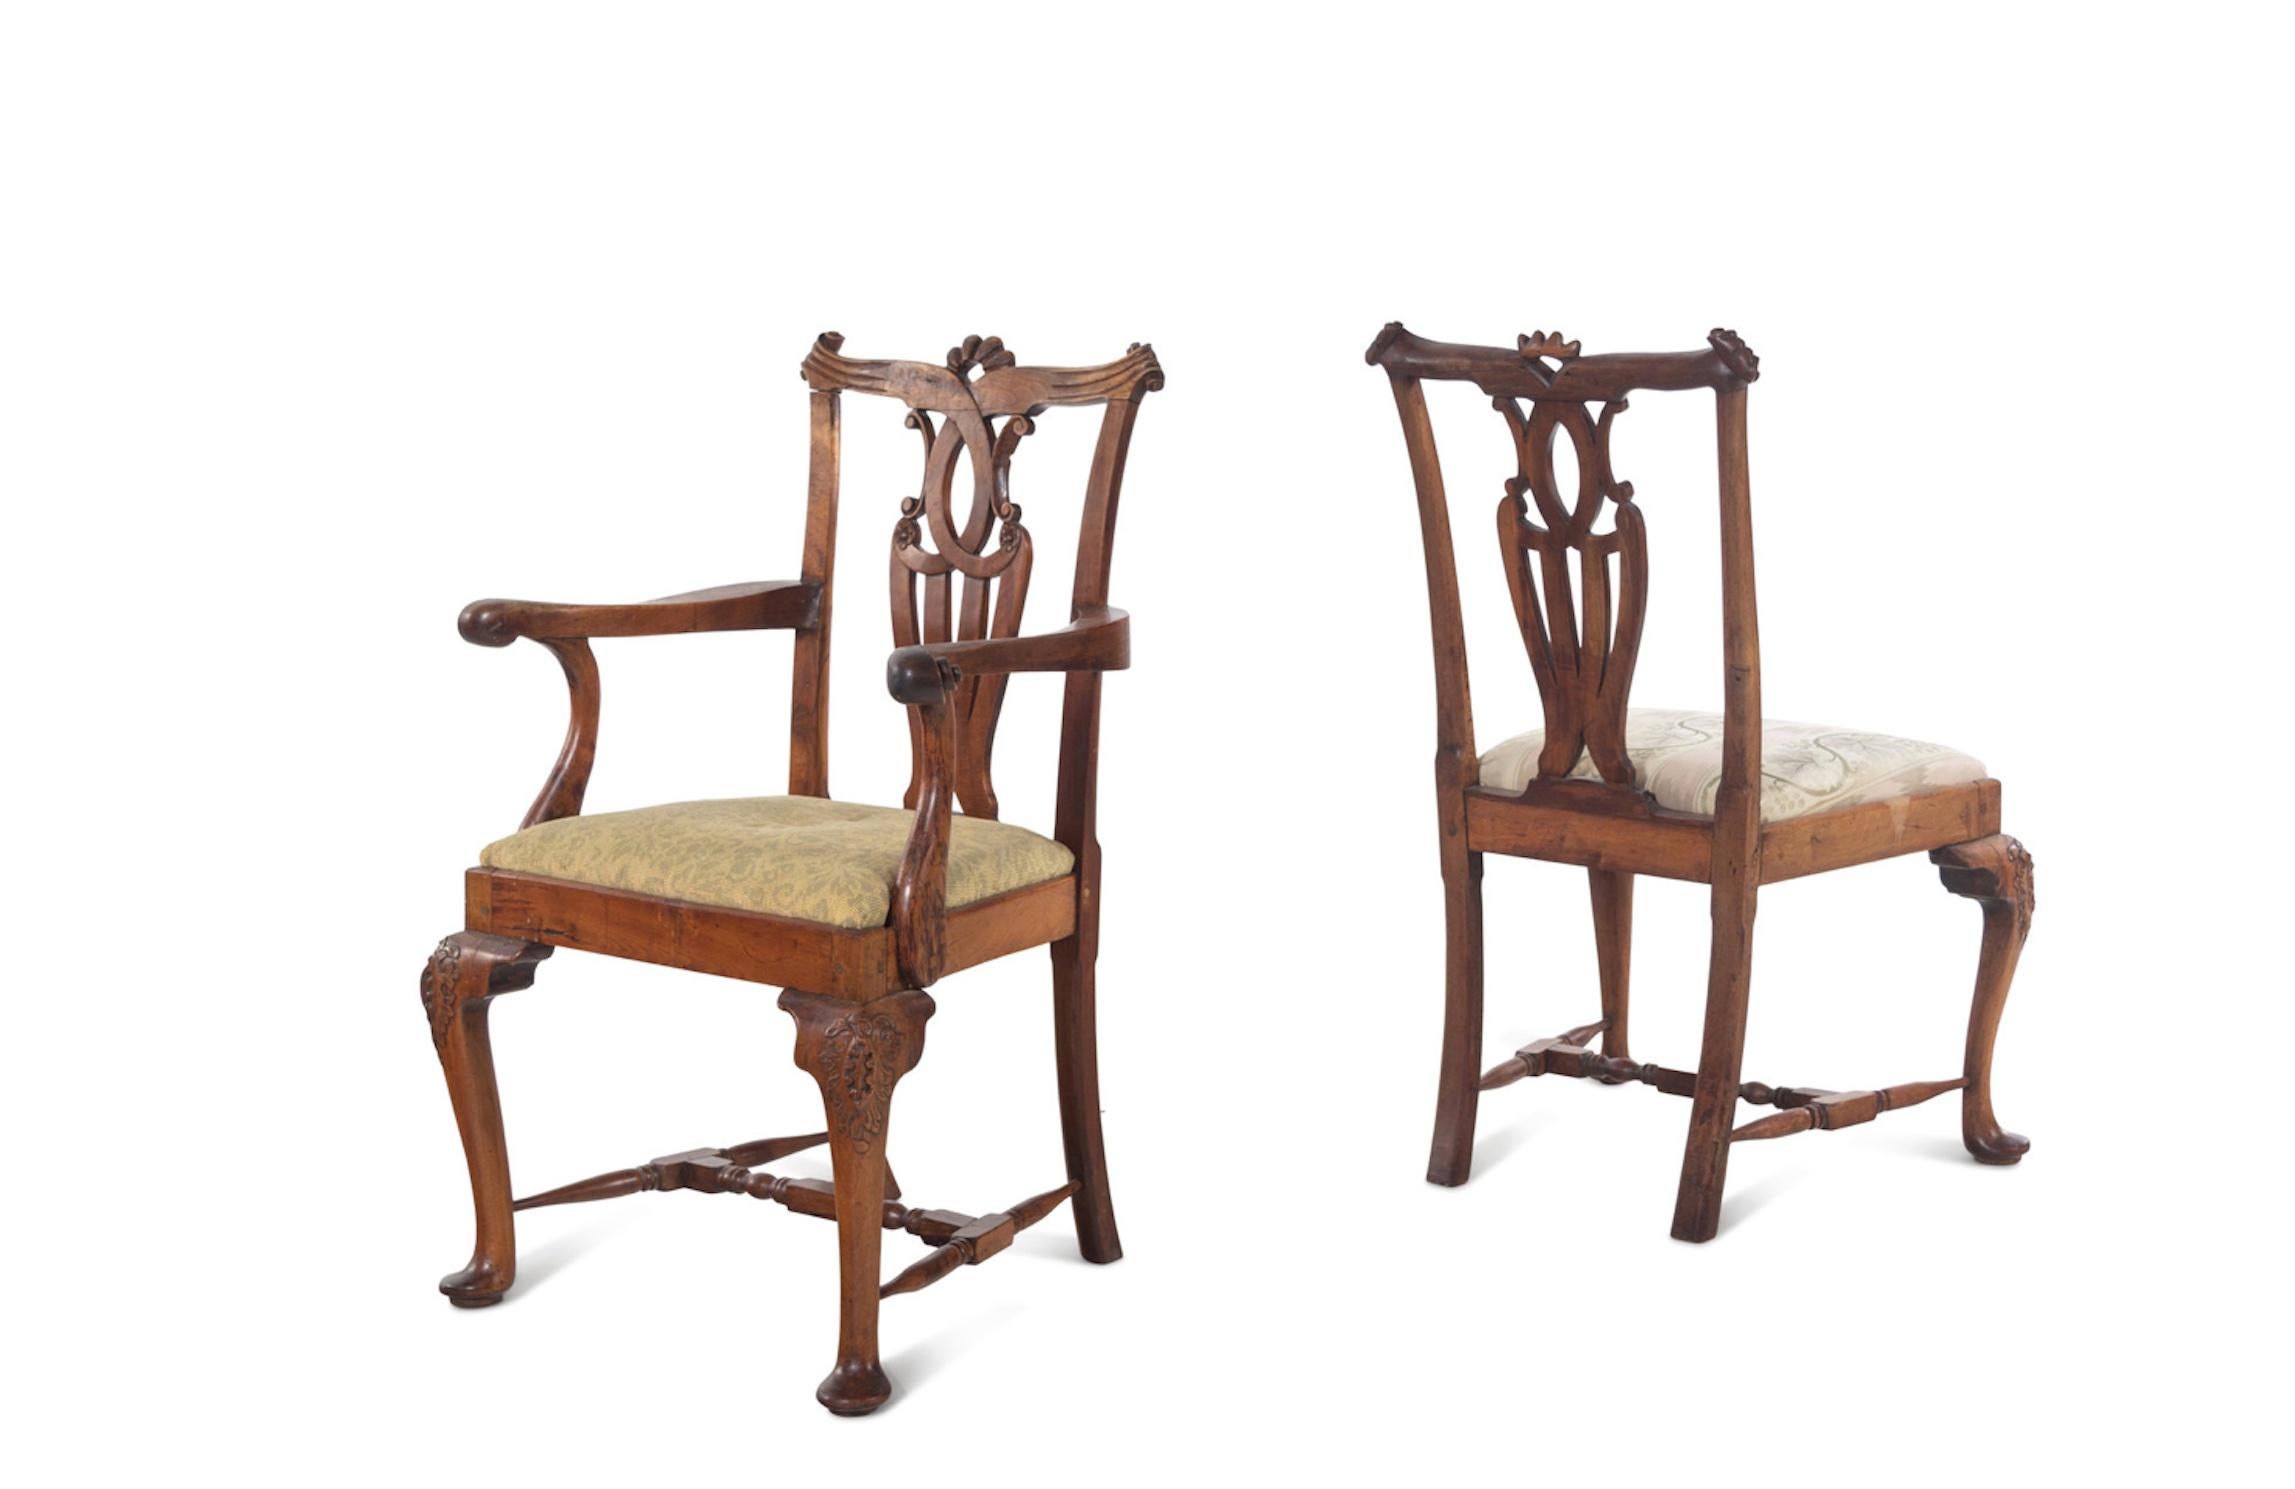 A Set of Seven George III Walnut Dining Chairs, Great Exaggerated Details 
To The Carving.  Priced Per Chair.
18th Century
Height 38 x width 24 x depth 21 inches.